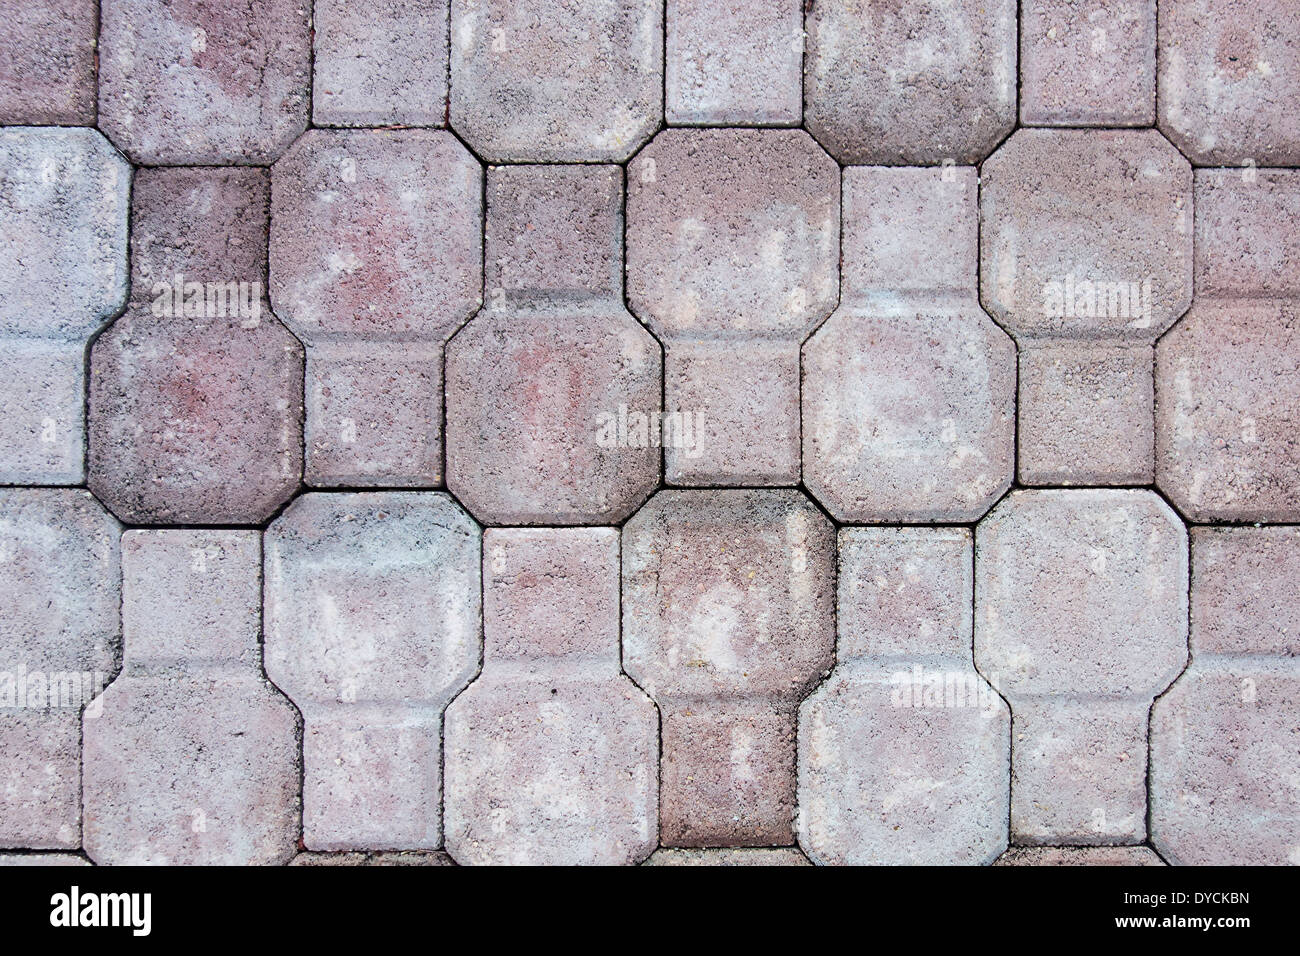 Manufactured paving stones on a walkway in a soft rose color. Background, backgrounds. Stock Photo